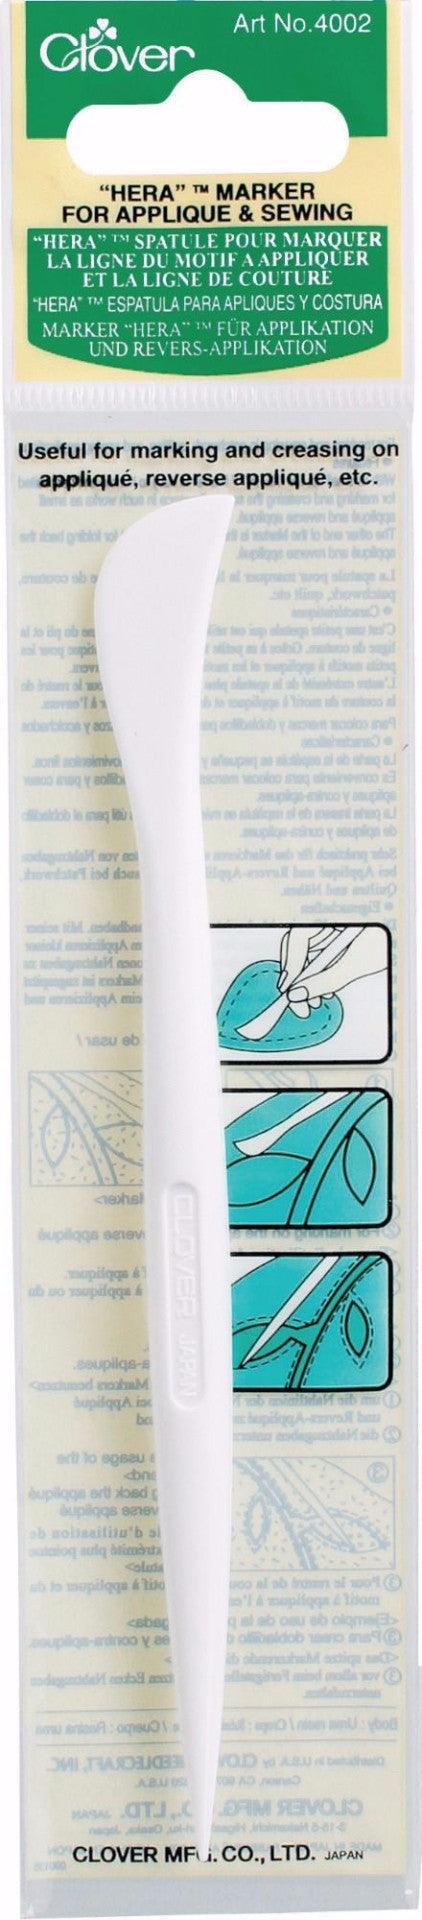 clover hera marker for quilting, haberdashery, craft and sewing projects. -  Sunnyside Fabrics UK